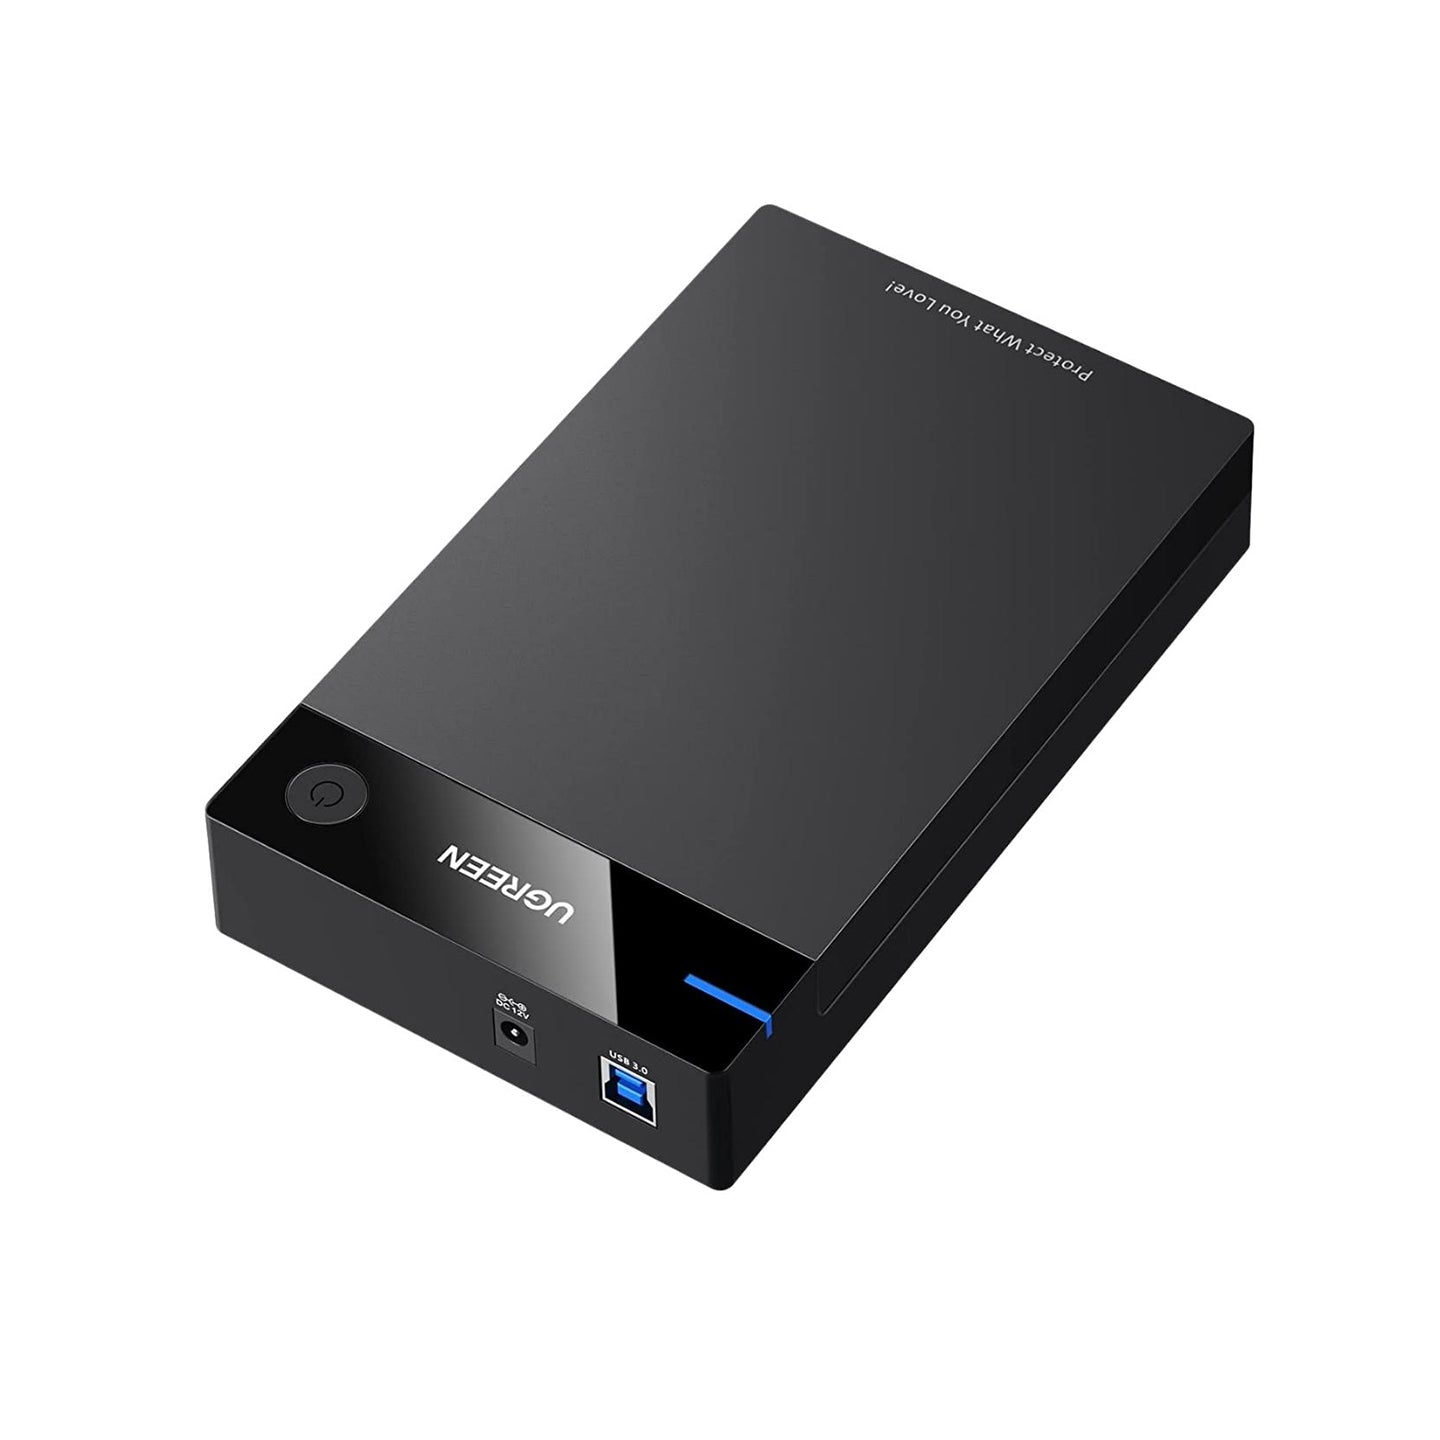 UGREEN External Hard Drive Enclosure 3.5" 2.5" SATA USB 3.0 with UASP Support, 5Gbps Transfer Speed, Sleep Mode for HDD and SSD | 50423